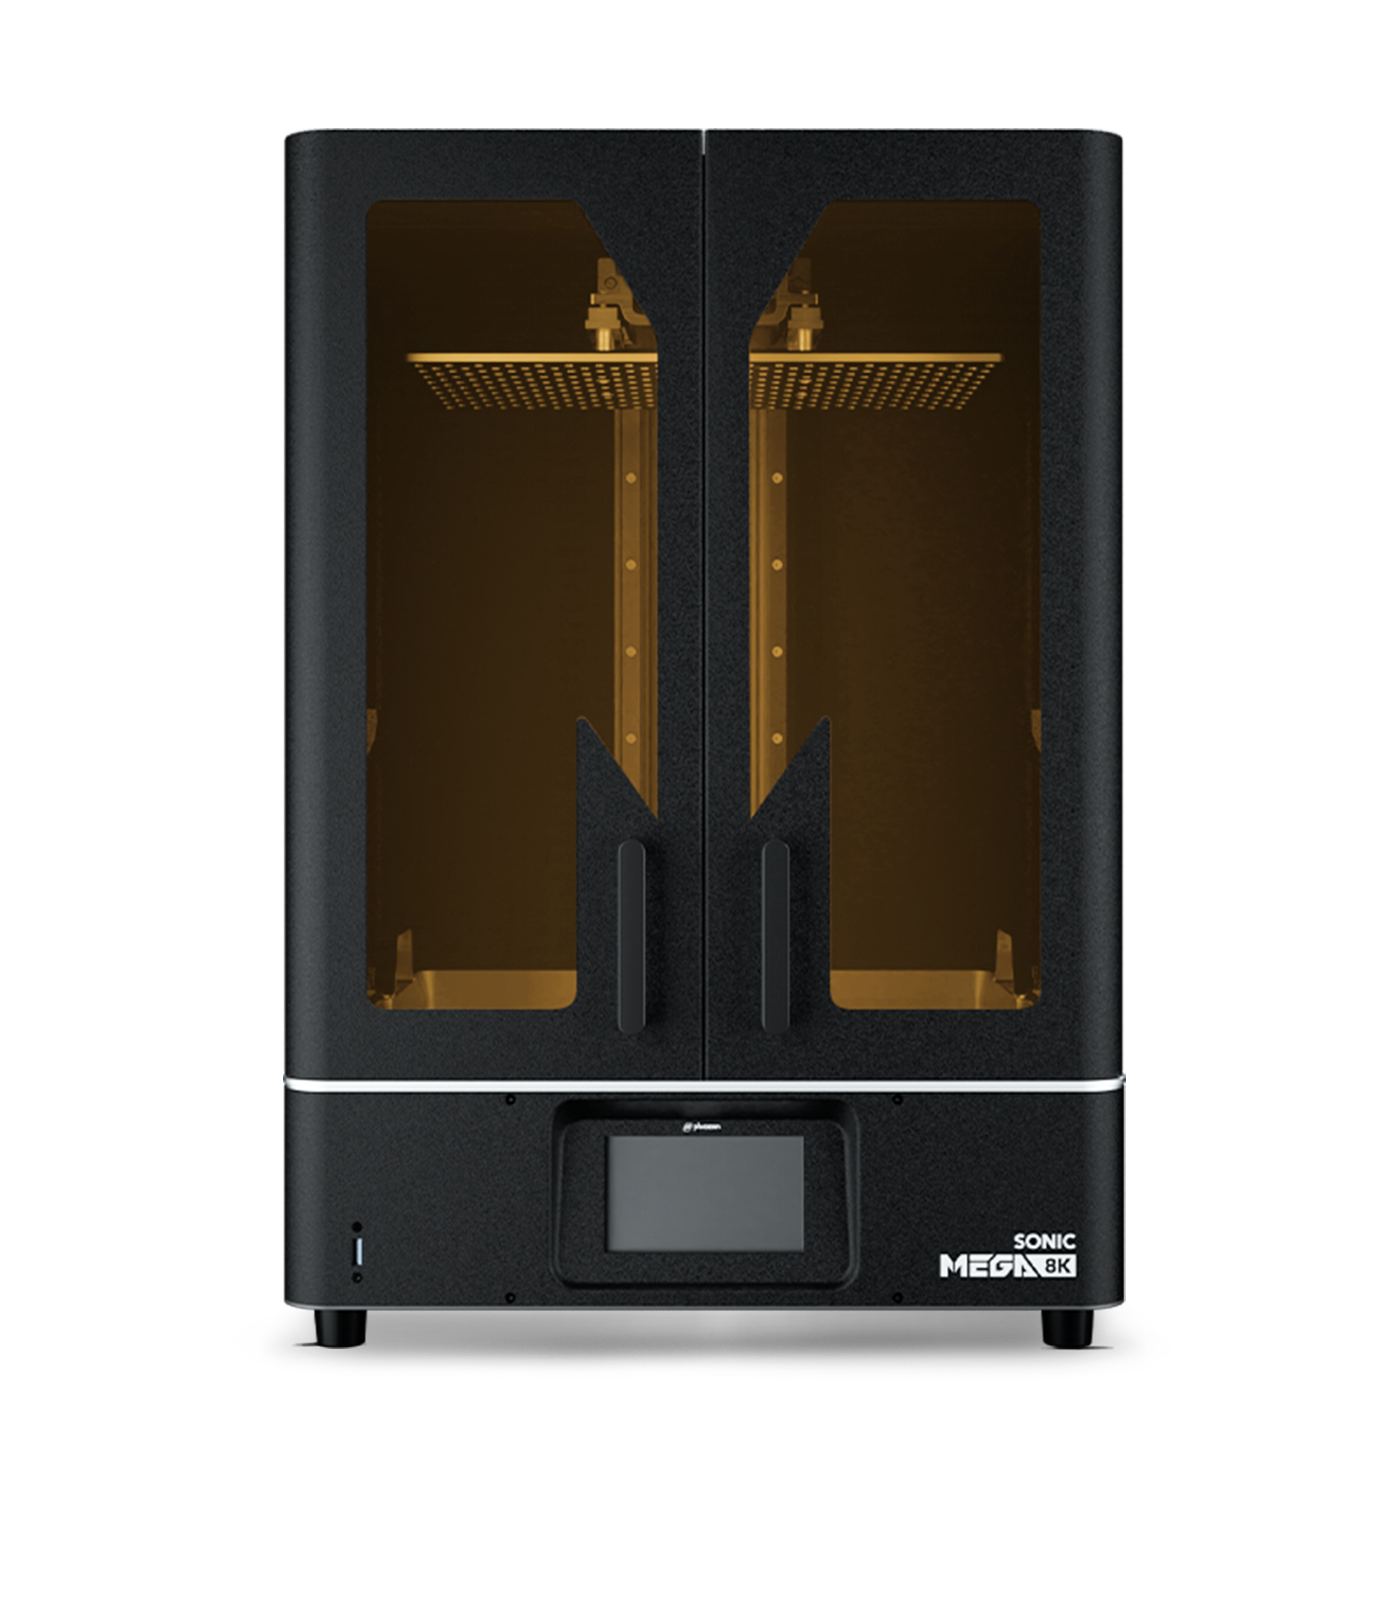 Sonic Mega 8K trumps all other commercial 3D printers on the market by showcasing striking details at 43µm, producing 3D printed parts that are almost twice as detailed as other large 3D printers. 